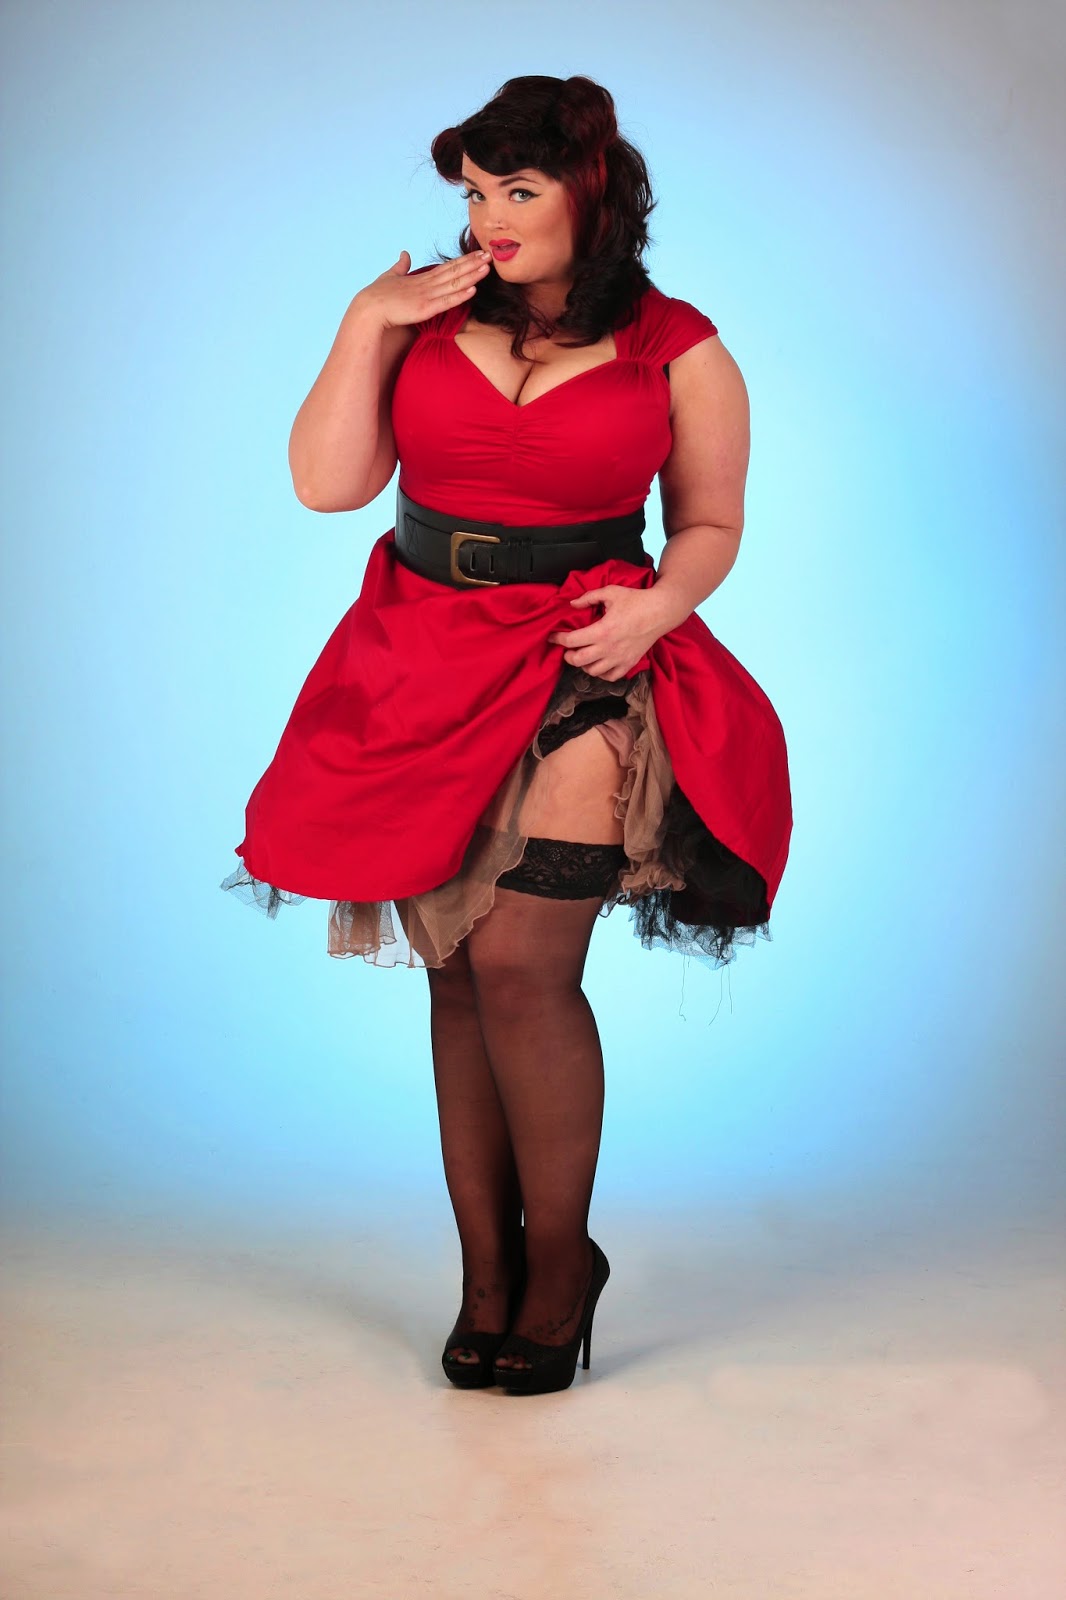 Laura Whittaker Photography: Throwback Thursday: A Colourful Pin Up